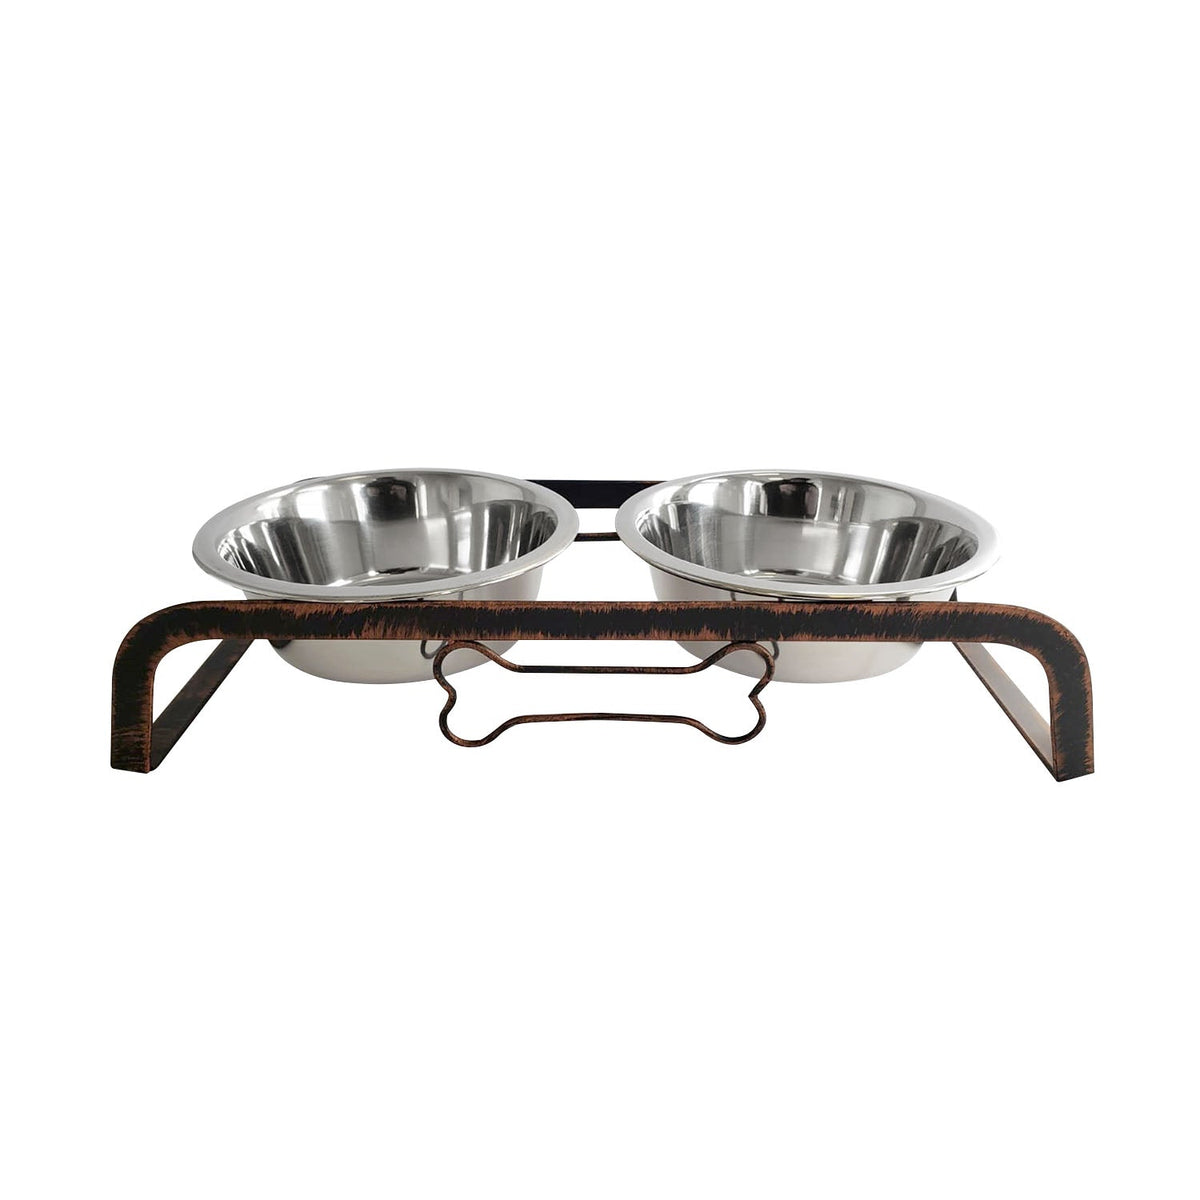 Elevated Rustic Design Dog Bone Feeder with 2 Stainless Steel Bowls by American Pet Supplies